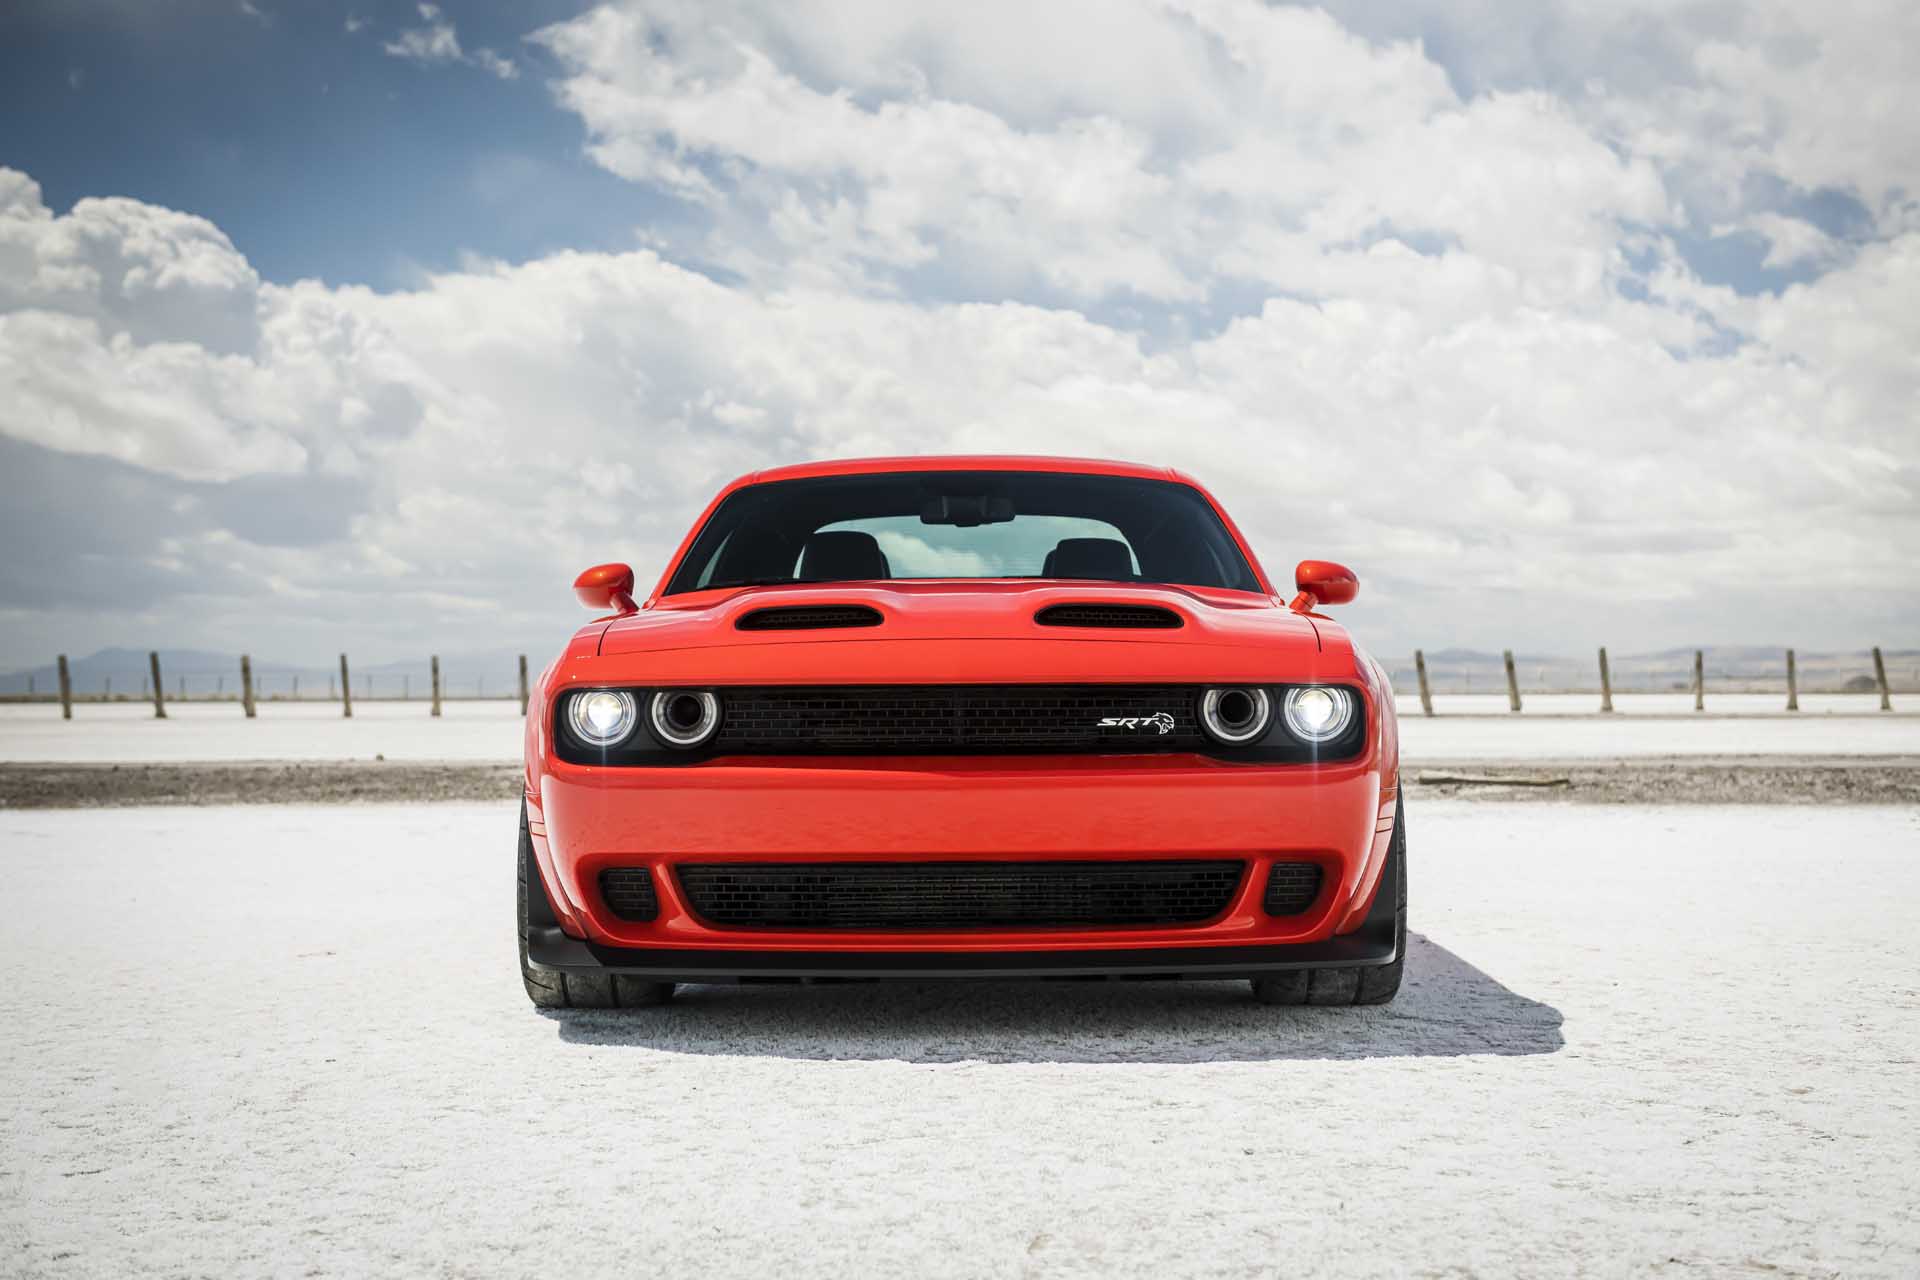 Dodge Challenger Hellcat manual transmission option disappeared in 2021